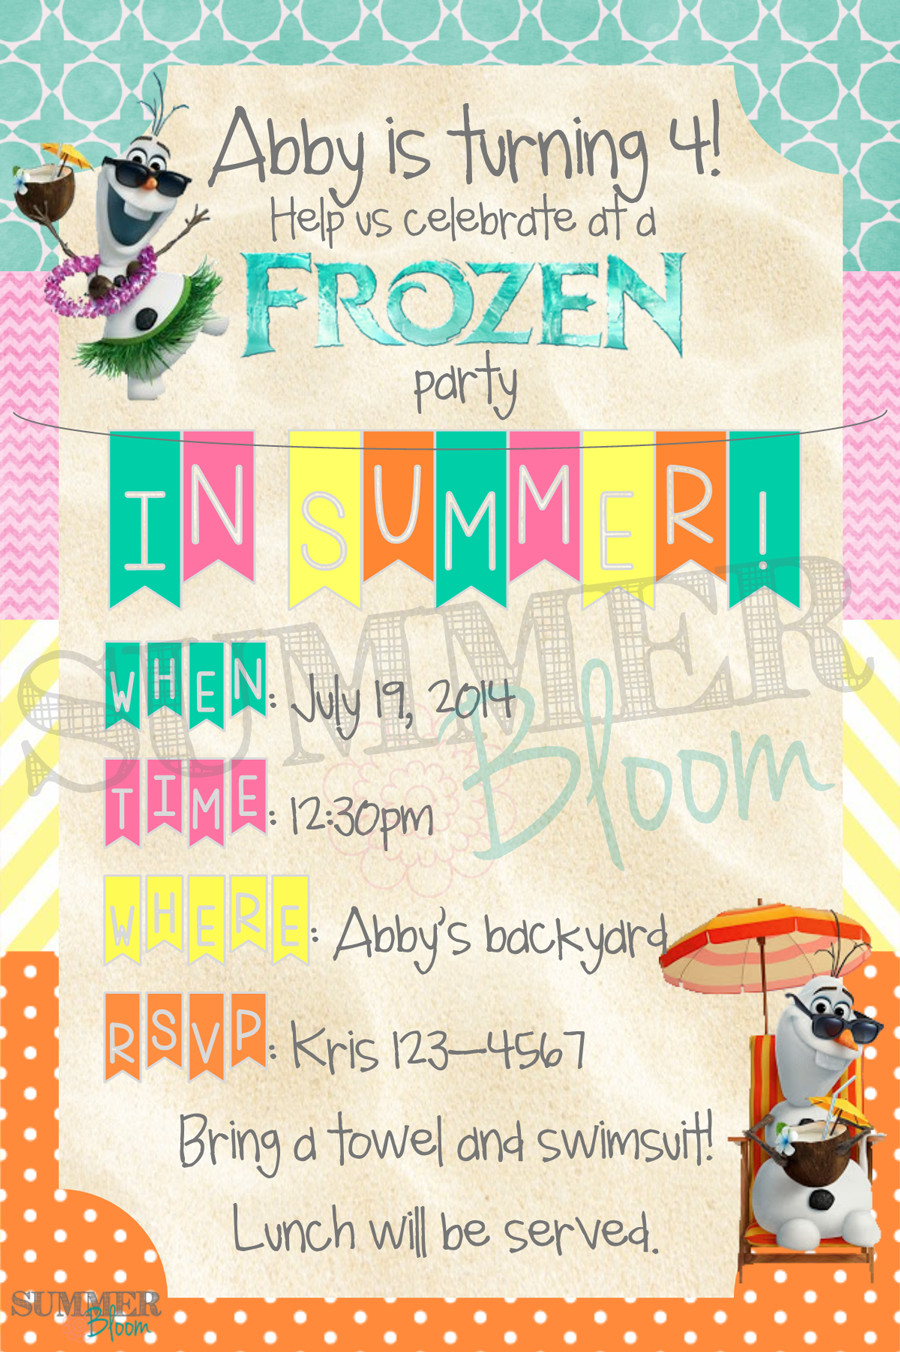 Summer Party Invitation Wording Ideas
 Frozen and Olaf "In Summer" themed Birthday Party